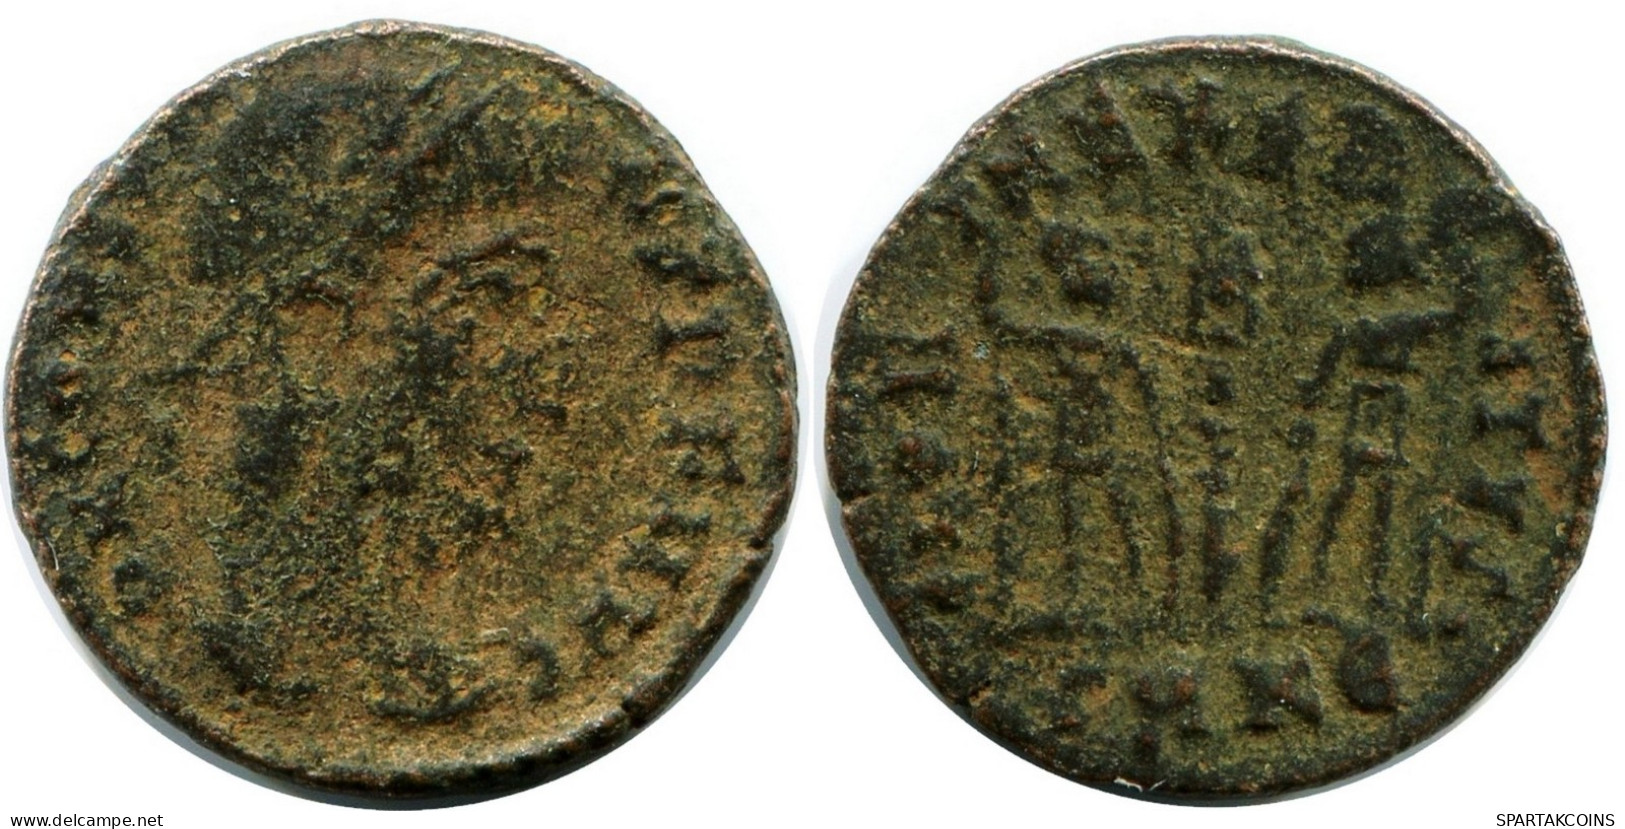 CONSTANS MINTED IN CYZICUS FROM THE ROYAL ONTARIO MUSEUM #ANC11684.14.E.A - The Christian Empire (307 AD To 363 AD)